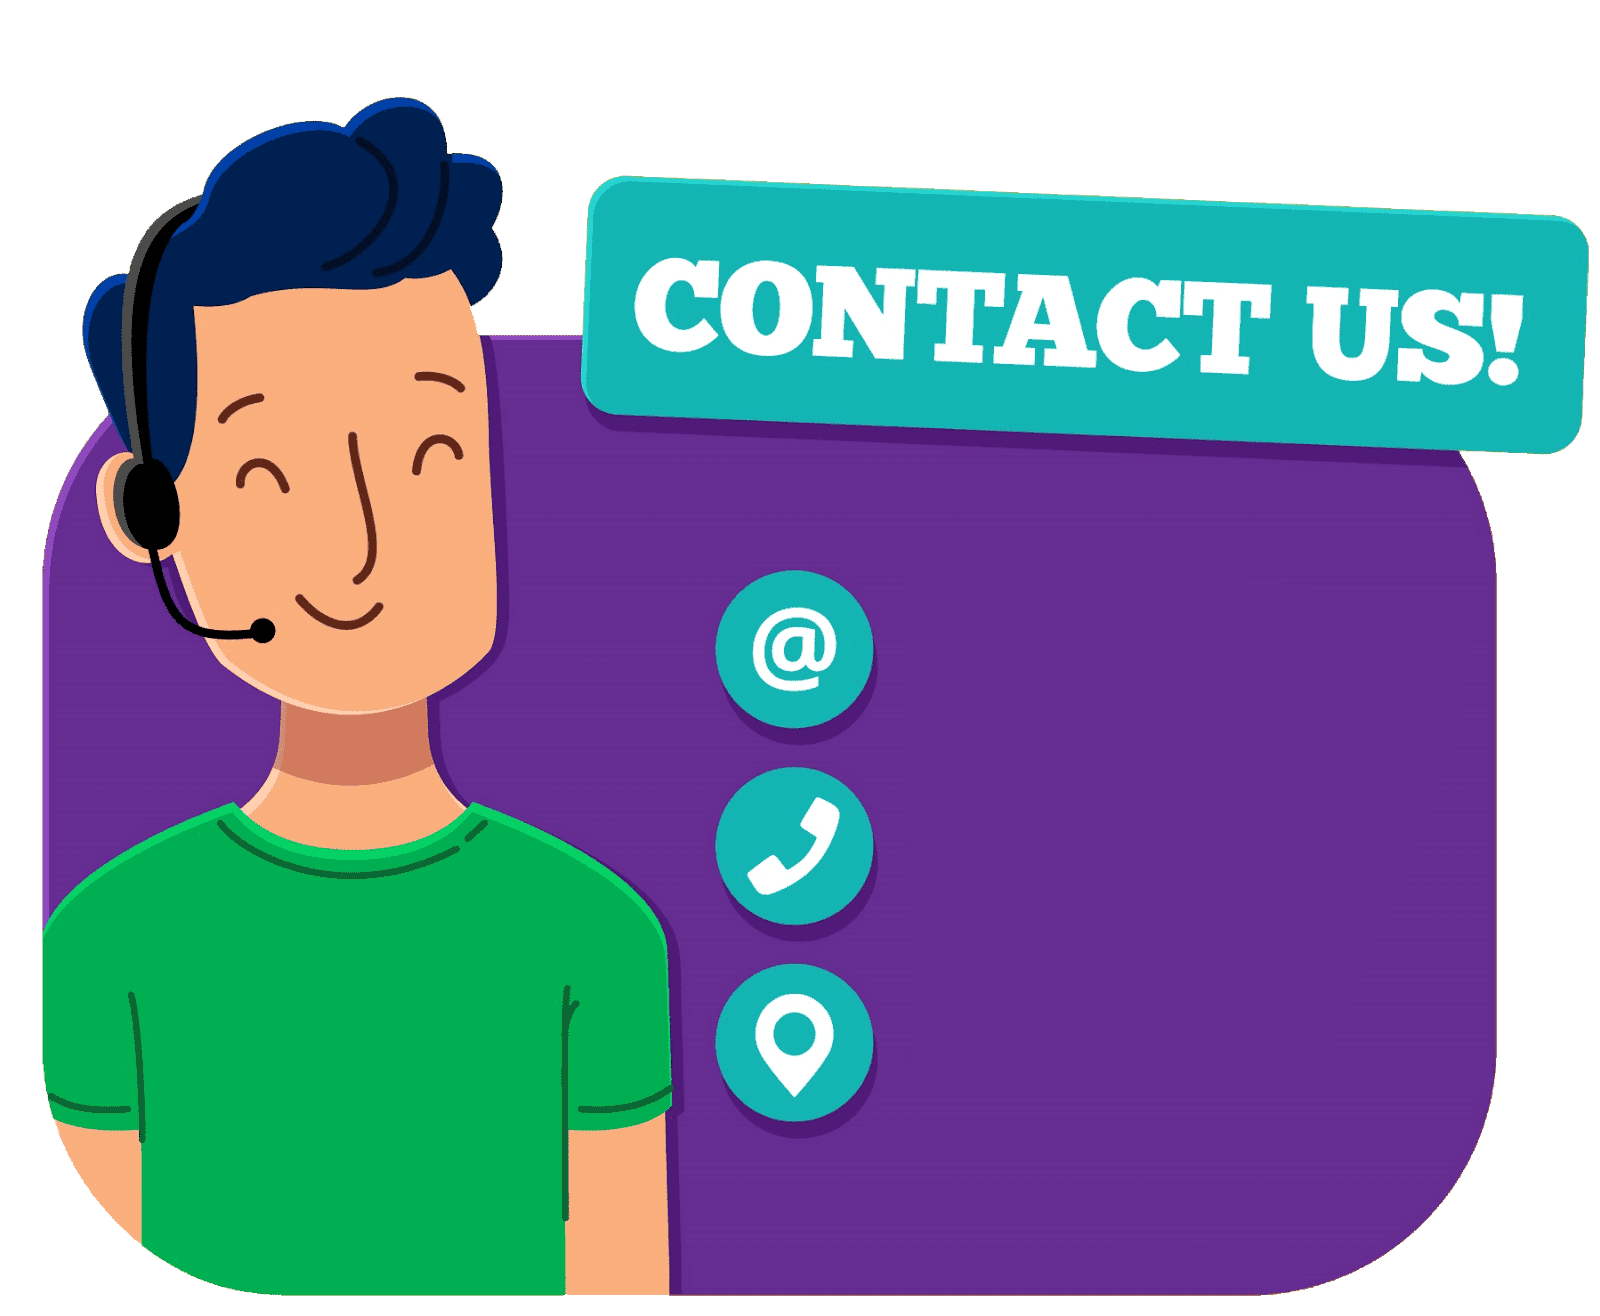 CONTACT PAGE